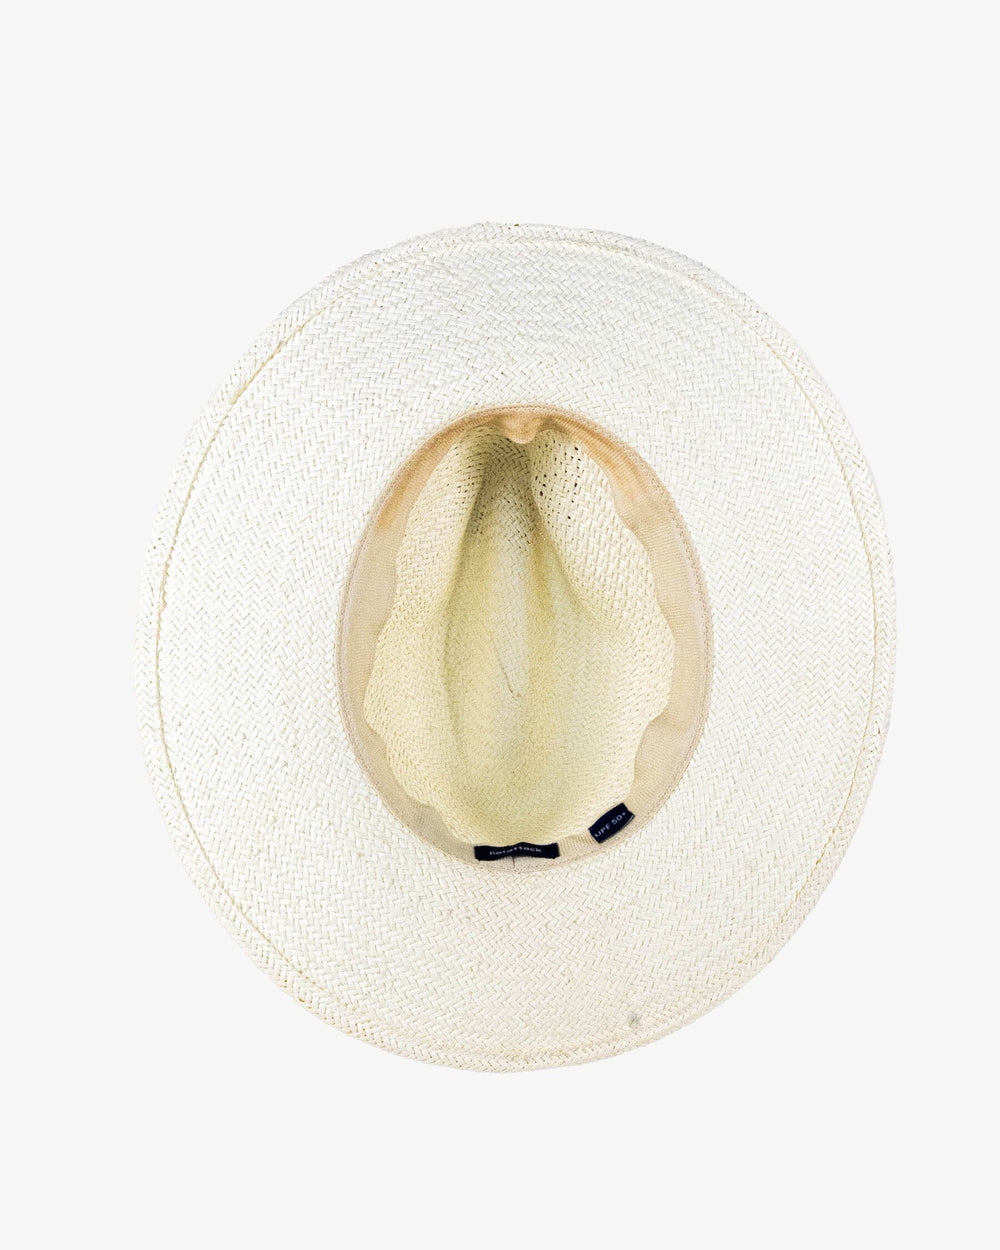 The detail view of the Southern Tide Packable Straw Beach Hat by Southern Tide - White